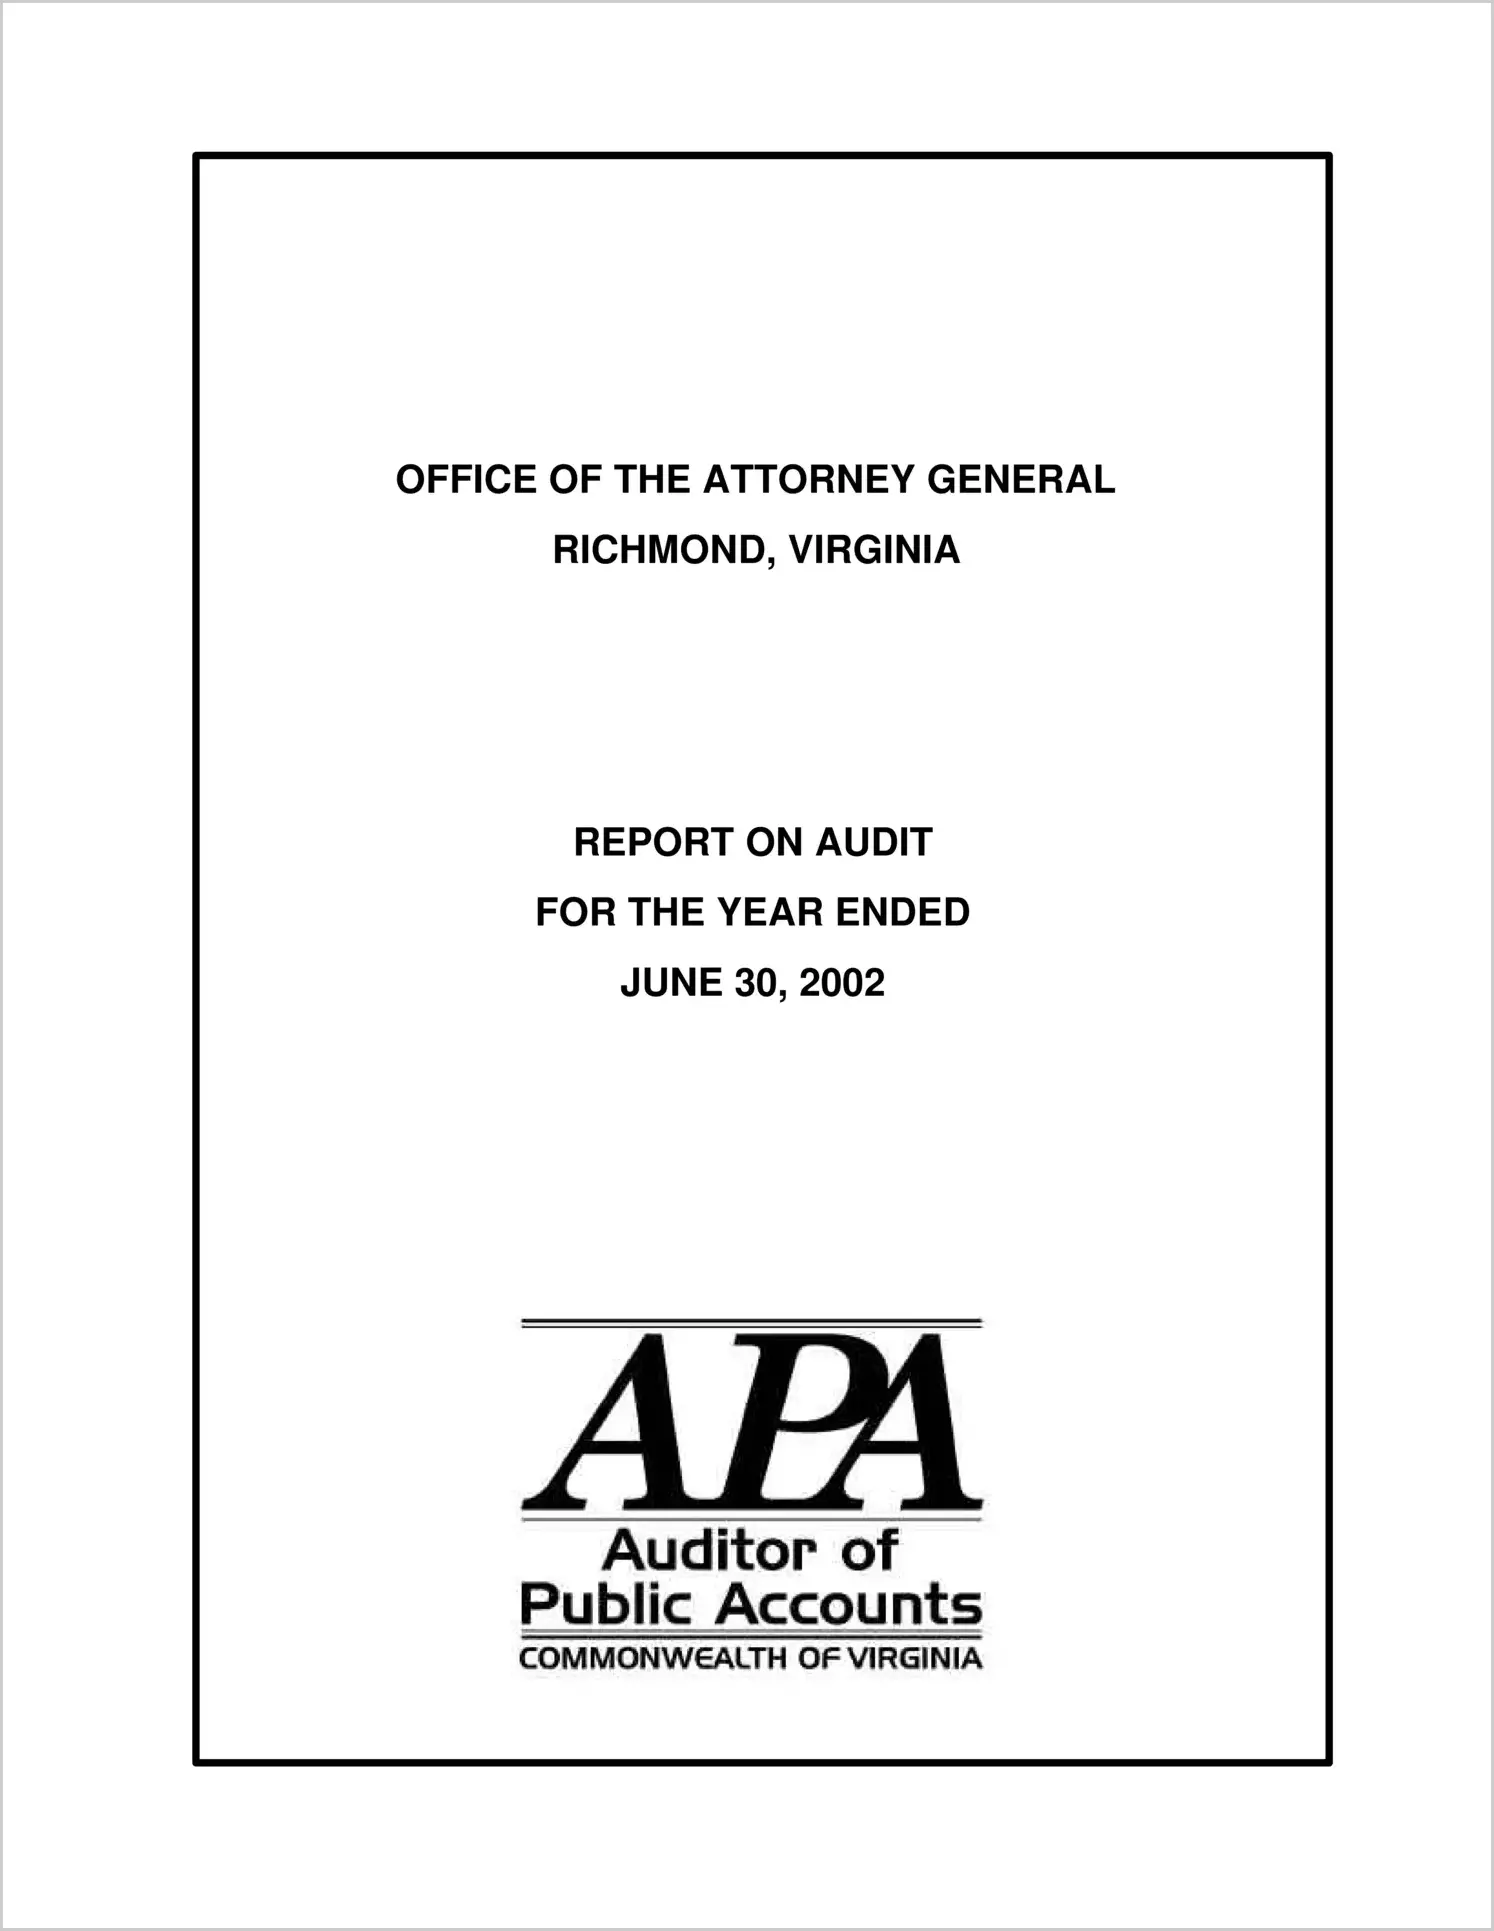 Office of the Attorney General for the year ended June 30, 2002